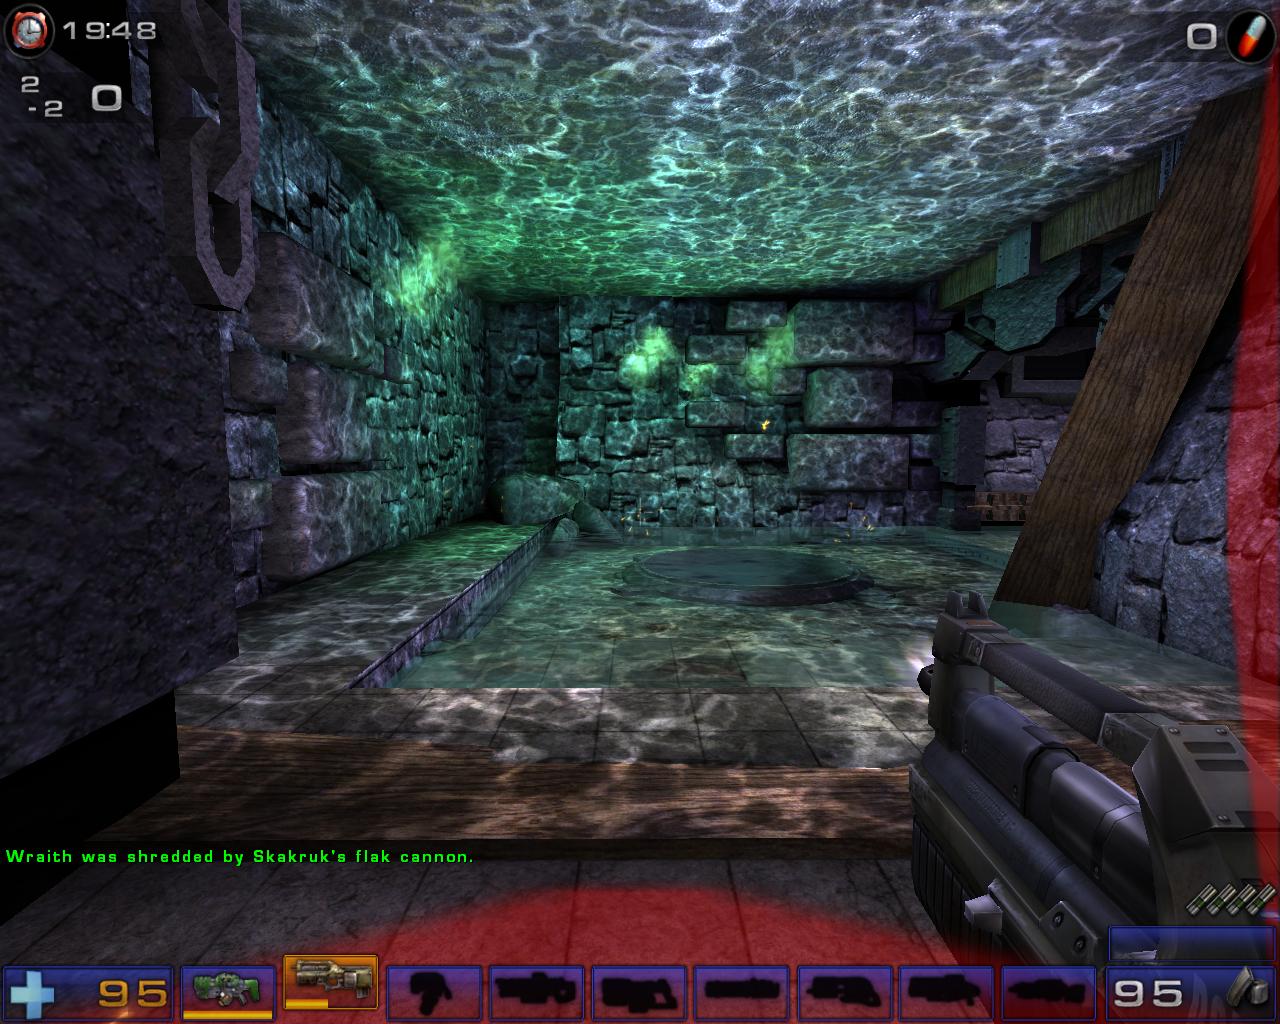 Media asset in full size related to 3dfxzone.it news item entitled as follows: Video: Unreal Tournament 2004 | DM-Curse4 Map | Full HD Gameplay Footage | Image Name: news30640_Unreal-Tournament-2004-Screenshot_1.jpg